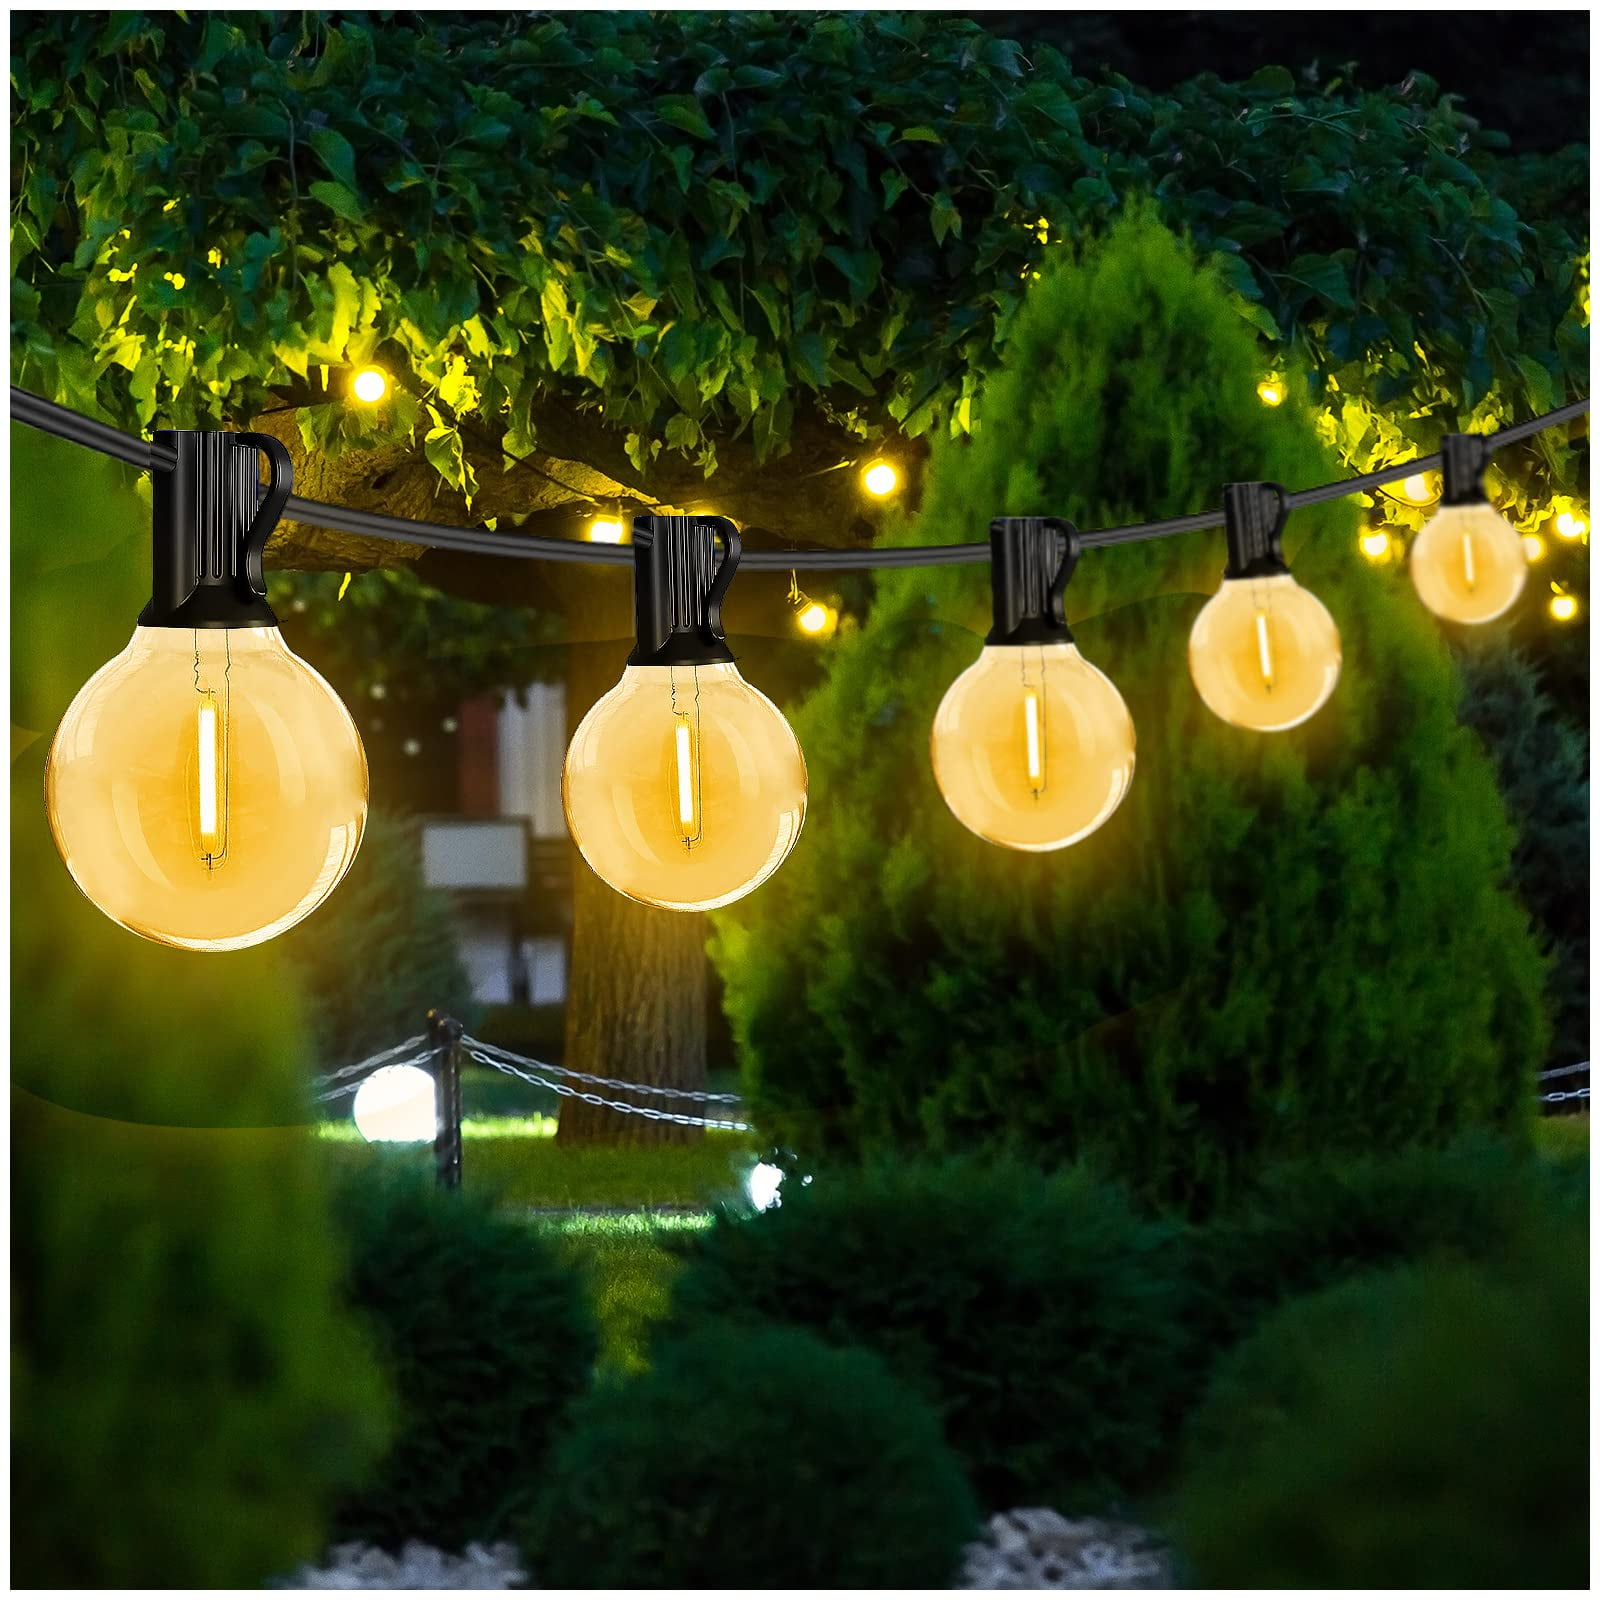 DAYBETTER 25ft Outdoor String Lights,15W G40 E12 Globe Patio Lights with 12  Edison Vintage Bulbs,Waterproof Connectable Hanging Lights for Backyard ,Porch,Balcony,Party Decor